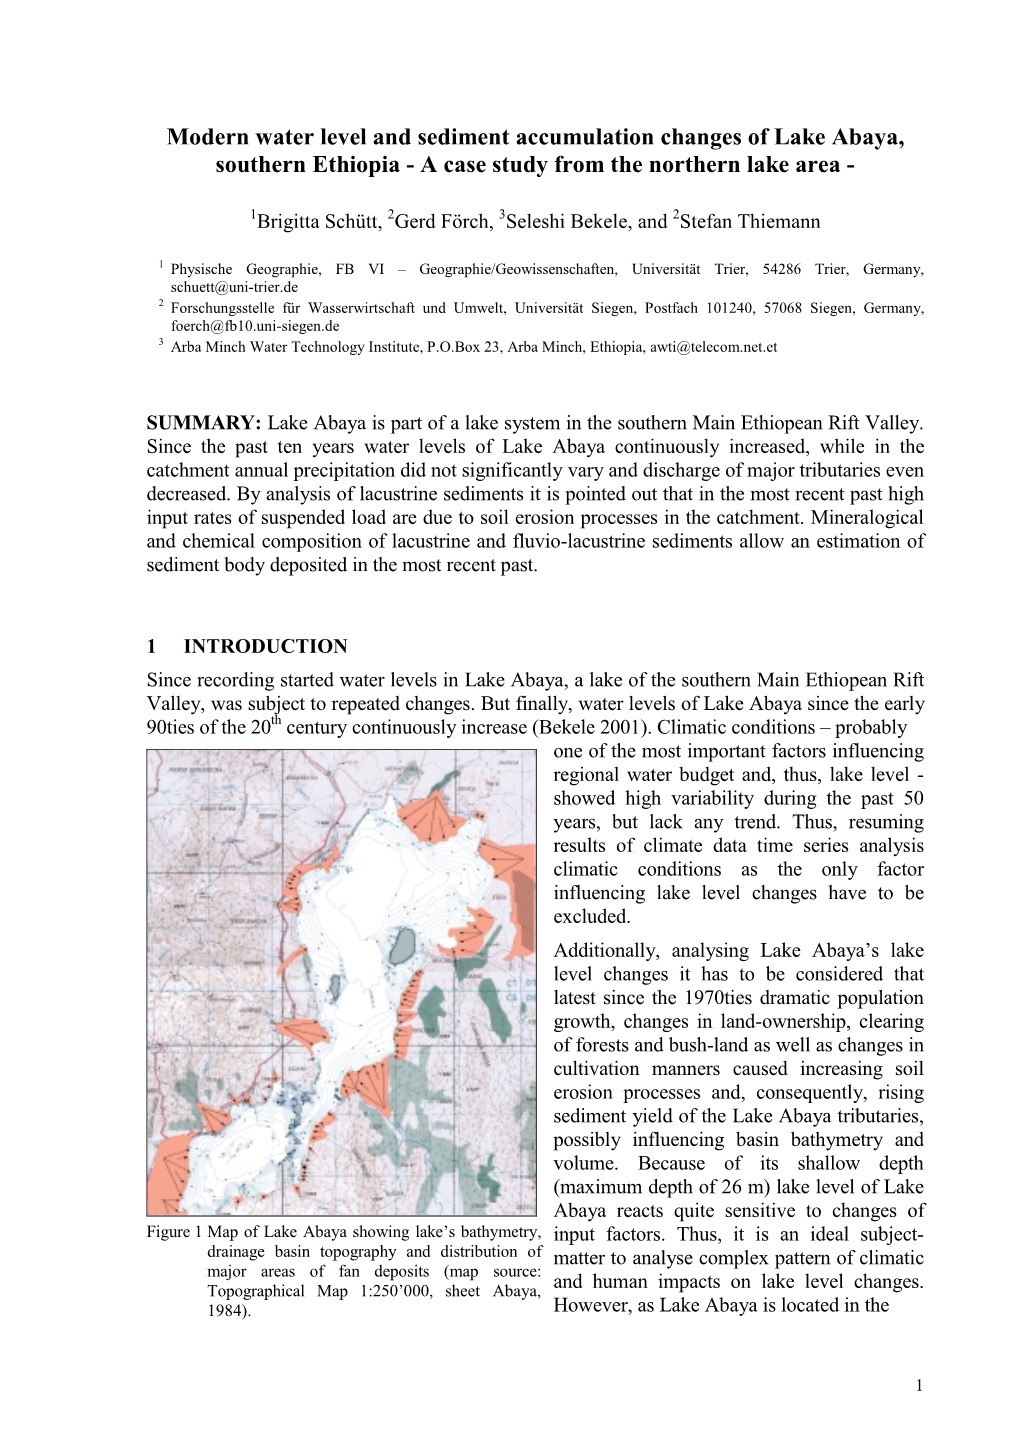 Modern Water Level and Sediment Accumulation Changes of Lake Abaya, Southern Ethiopia - a Case Study from the Northern Lake Area